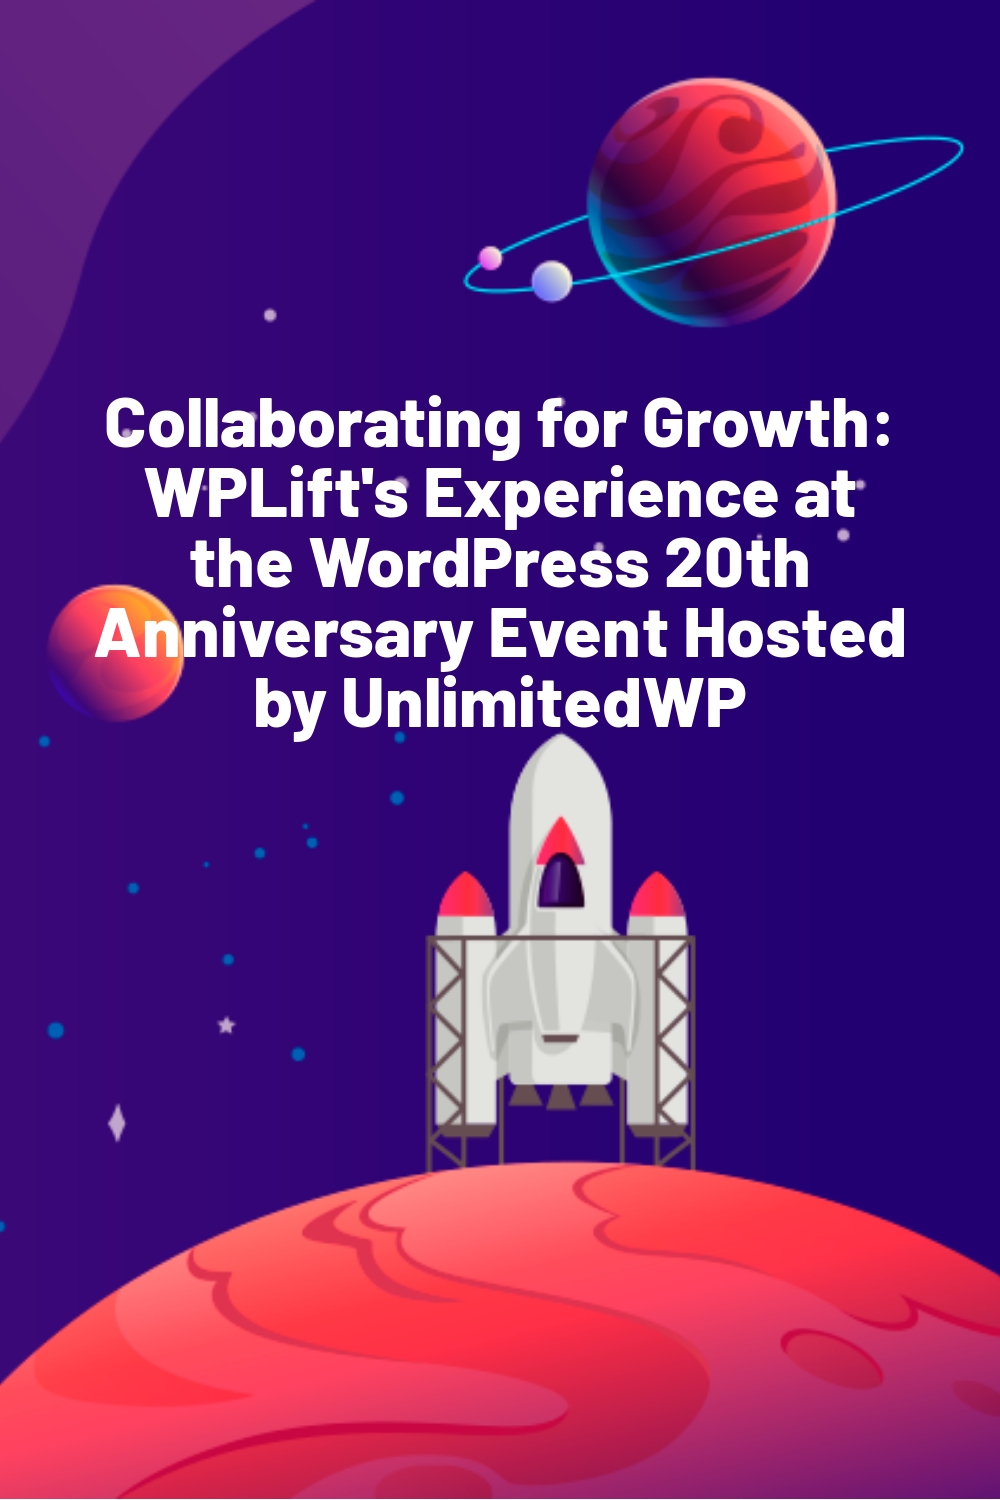 Collaborating for Growth: WPLift’s Experience at the WordPress 20th Anniversary Event Hosted by UnlimitedWP